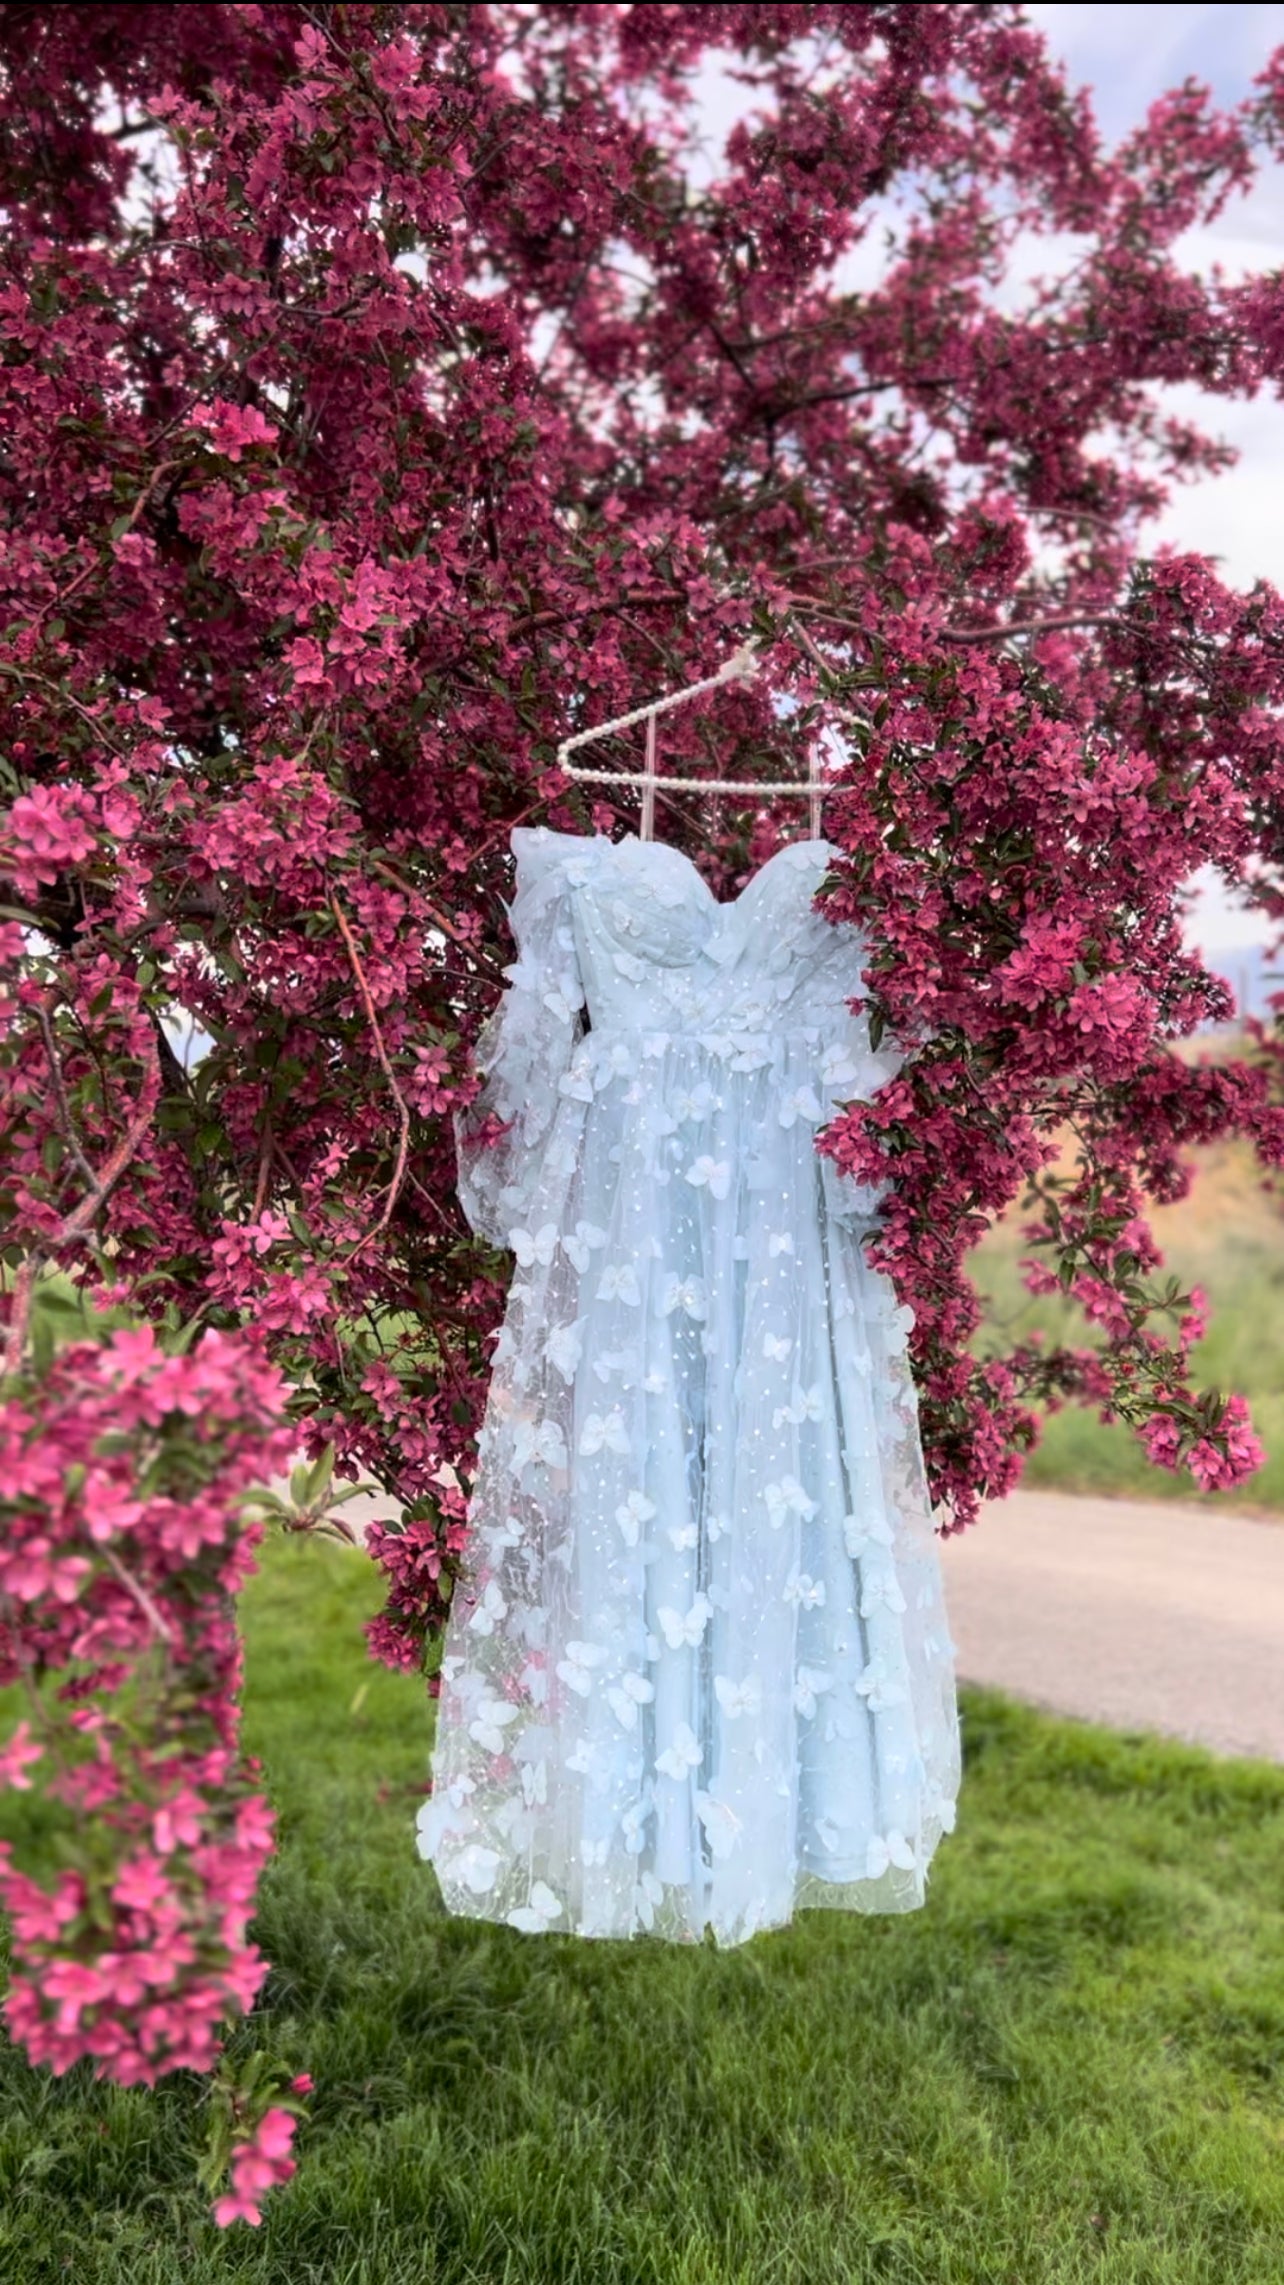 Buy Fair Lady Blue Butterfly Princess Prom Dresses 2020 Ball Gowns Evening  Dress Long Quinceanera Party Gowns at Amazon.in